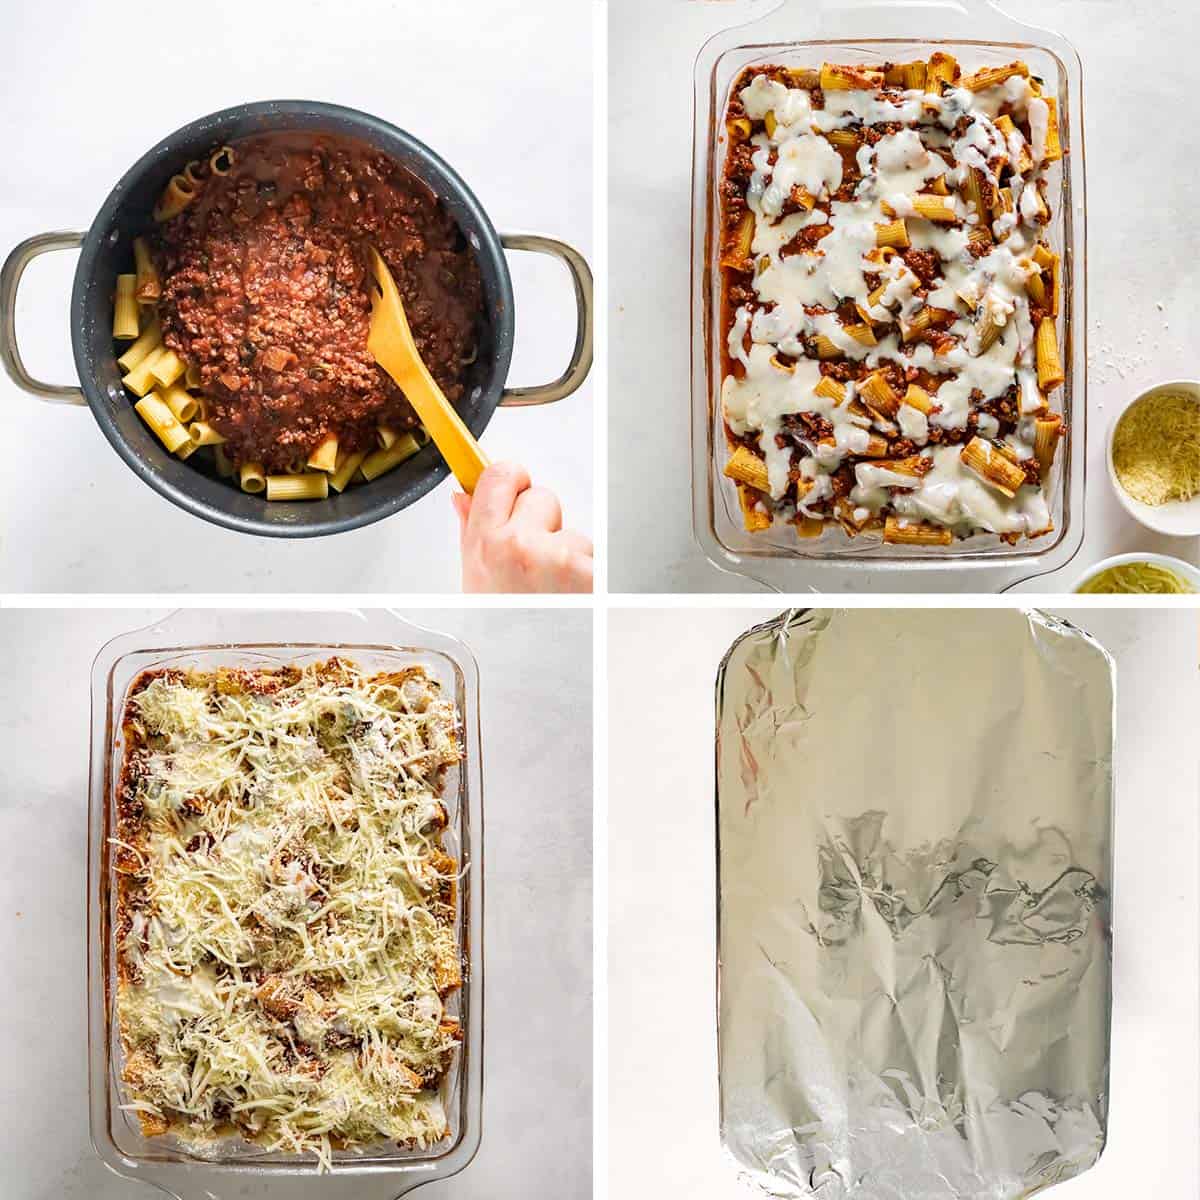 Rigatoni with meat sauce and bechamel is assembled in a baking dish.